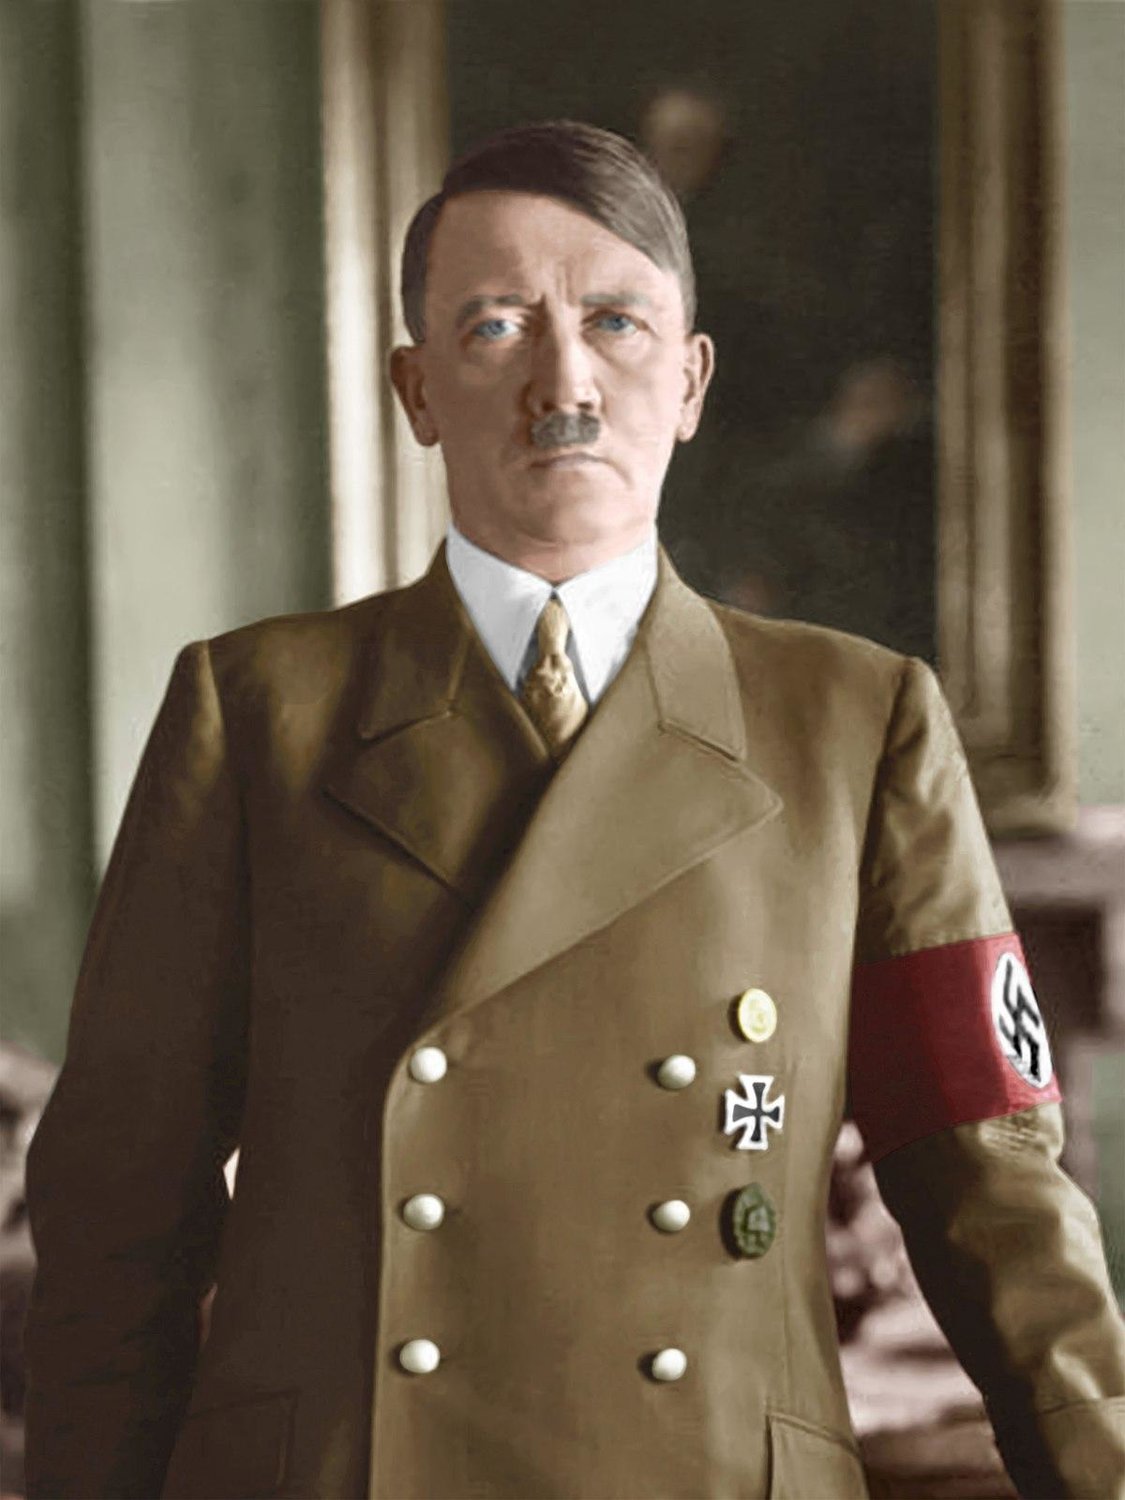 Today's propagandists could teach Adolf Hitler lessons - Wikipedia.org photo